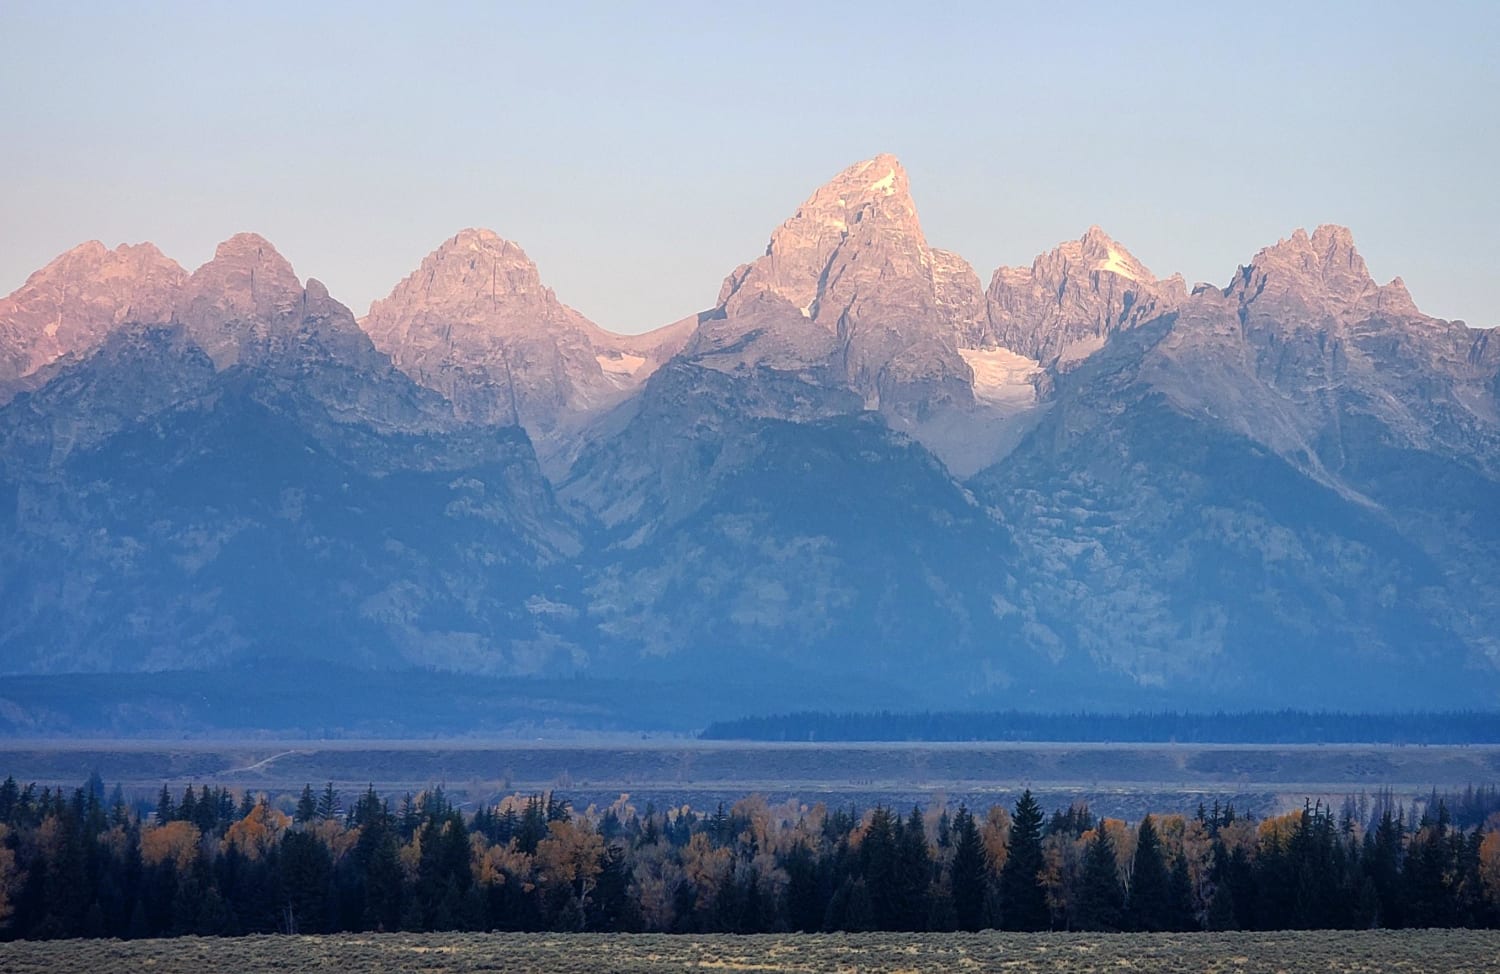 Yellowstone usually gets all the love with it's bison and geysers, but Grand Teton subtly stole my heart.